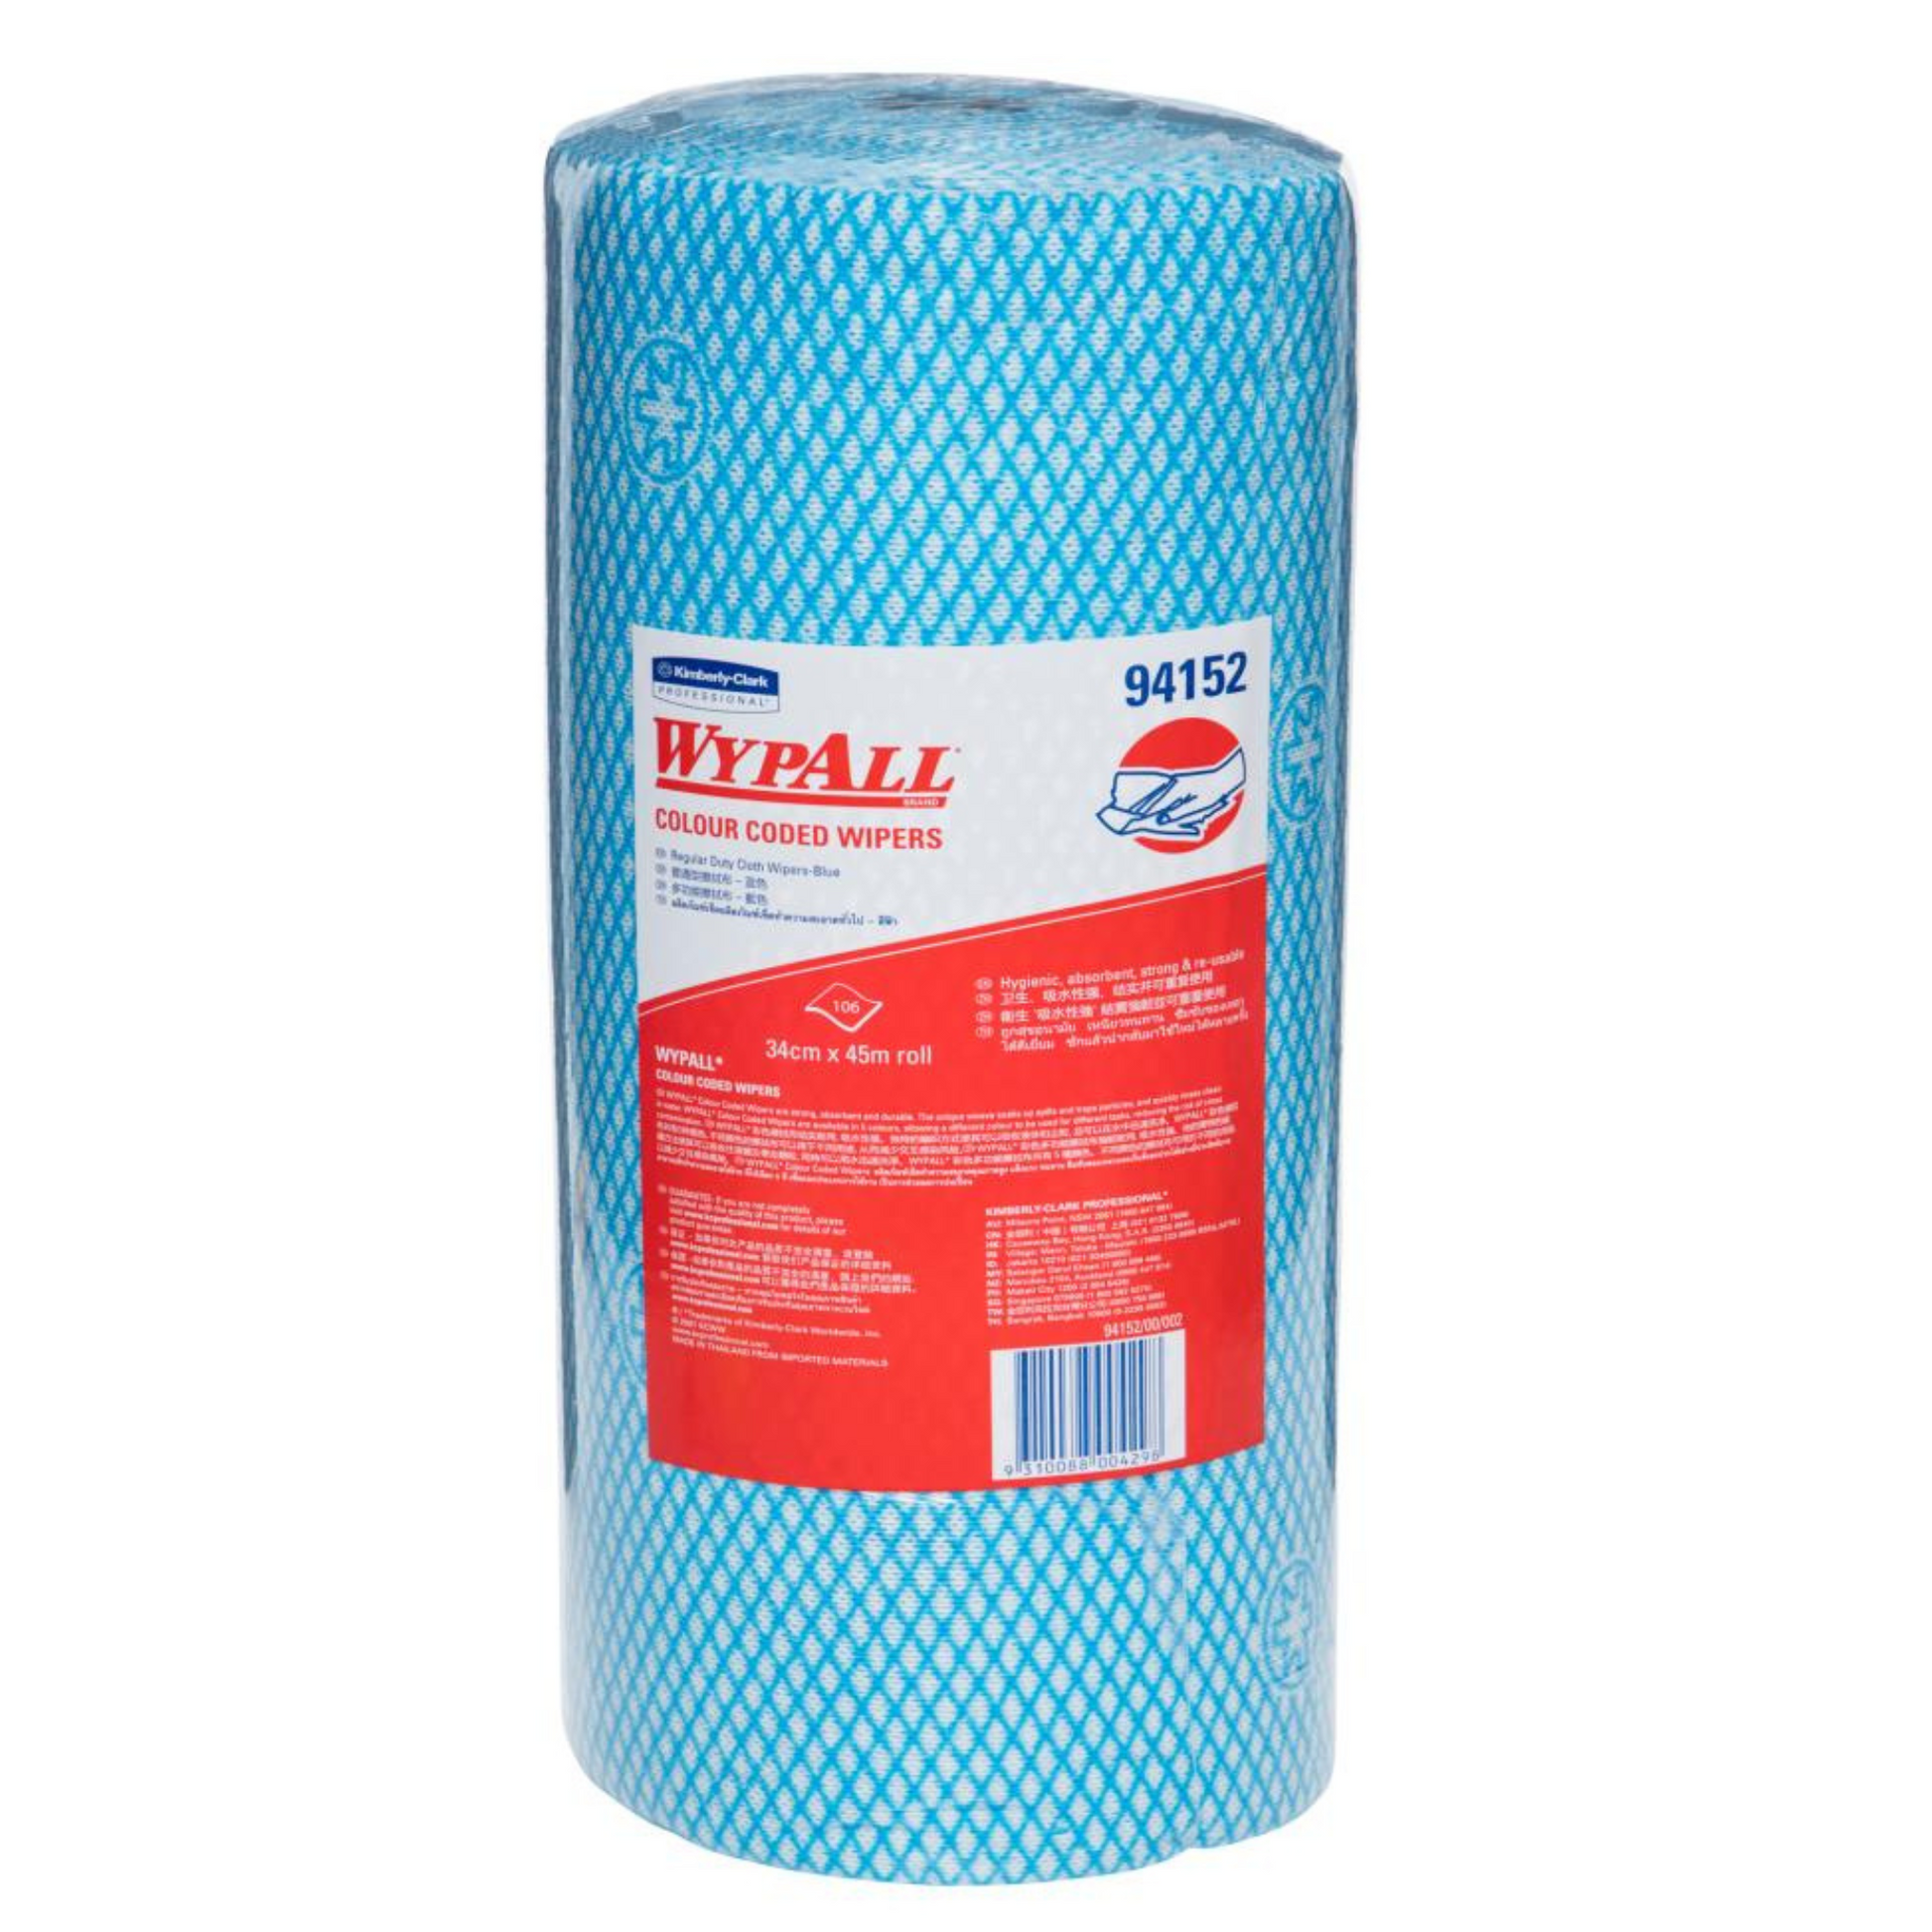 Wypall 94152 Mulitipurpose Wipe Roll 34cm x 45m Blue Colour Coded - Roll (1pc)